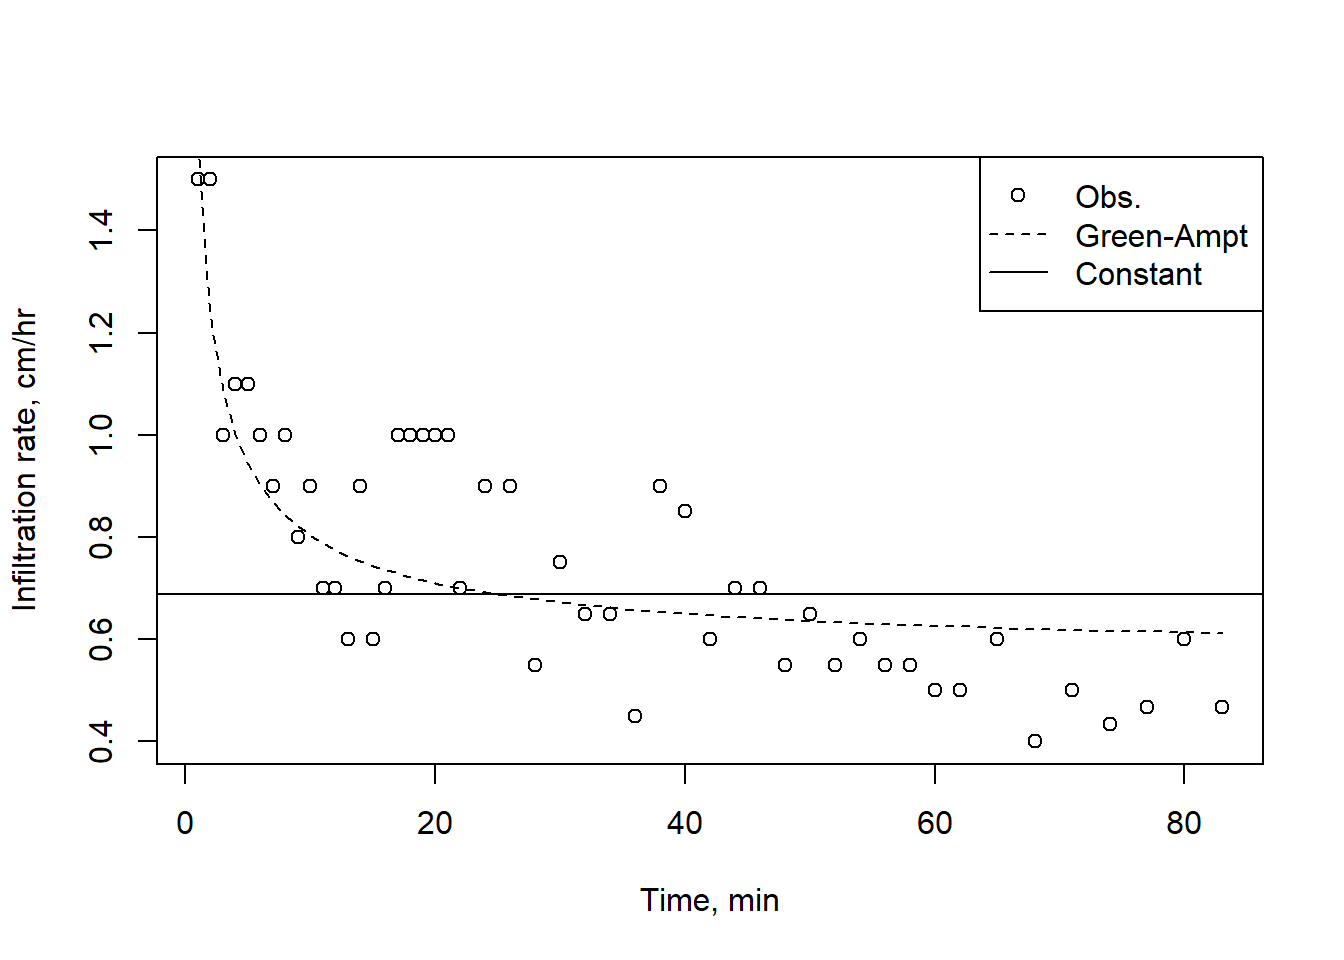 A Green-Ampt curve fit, with the average constant rate.